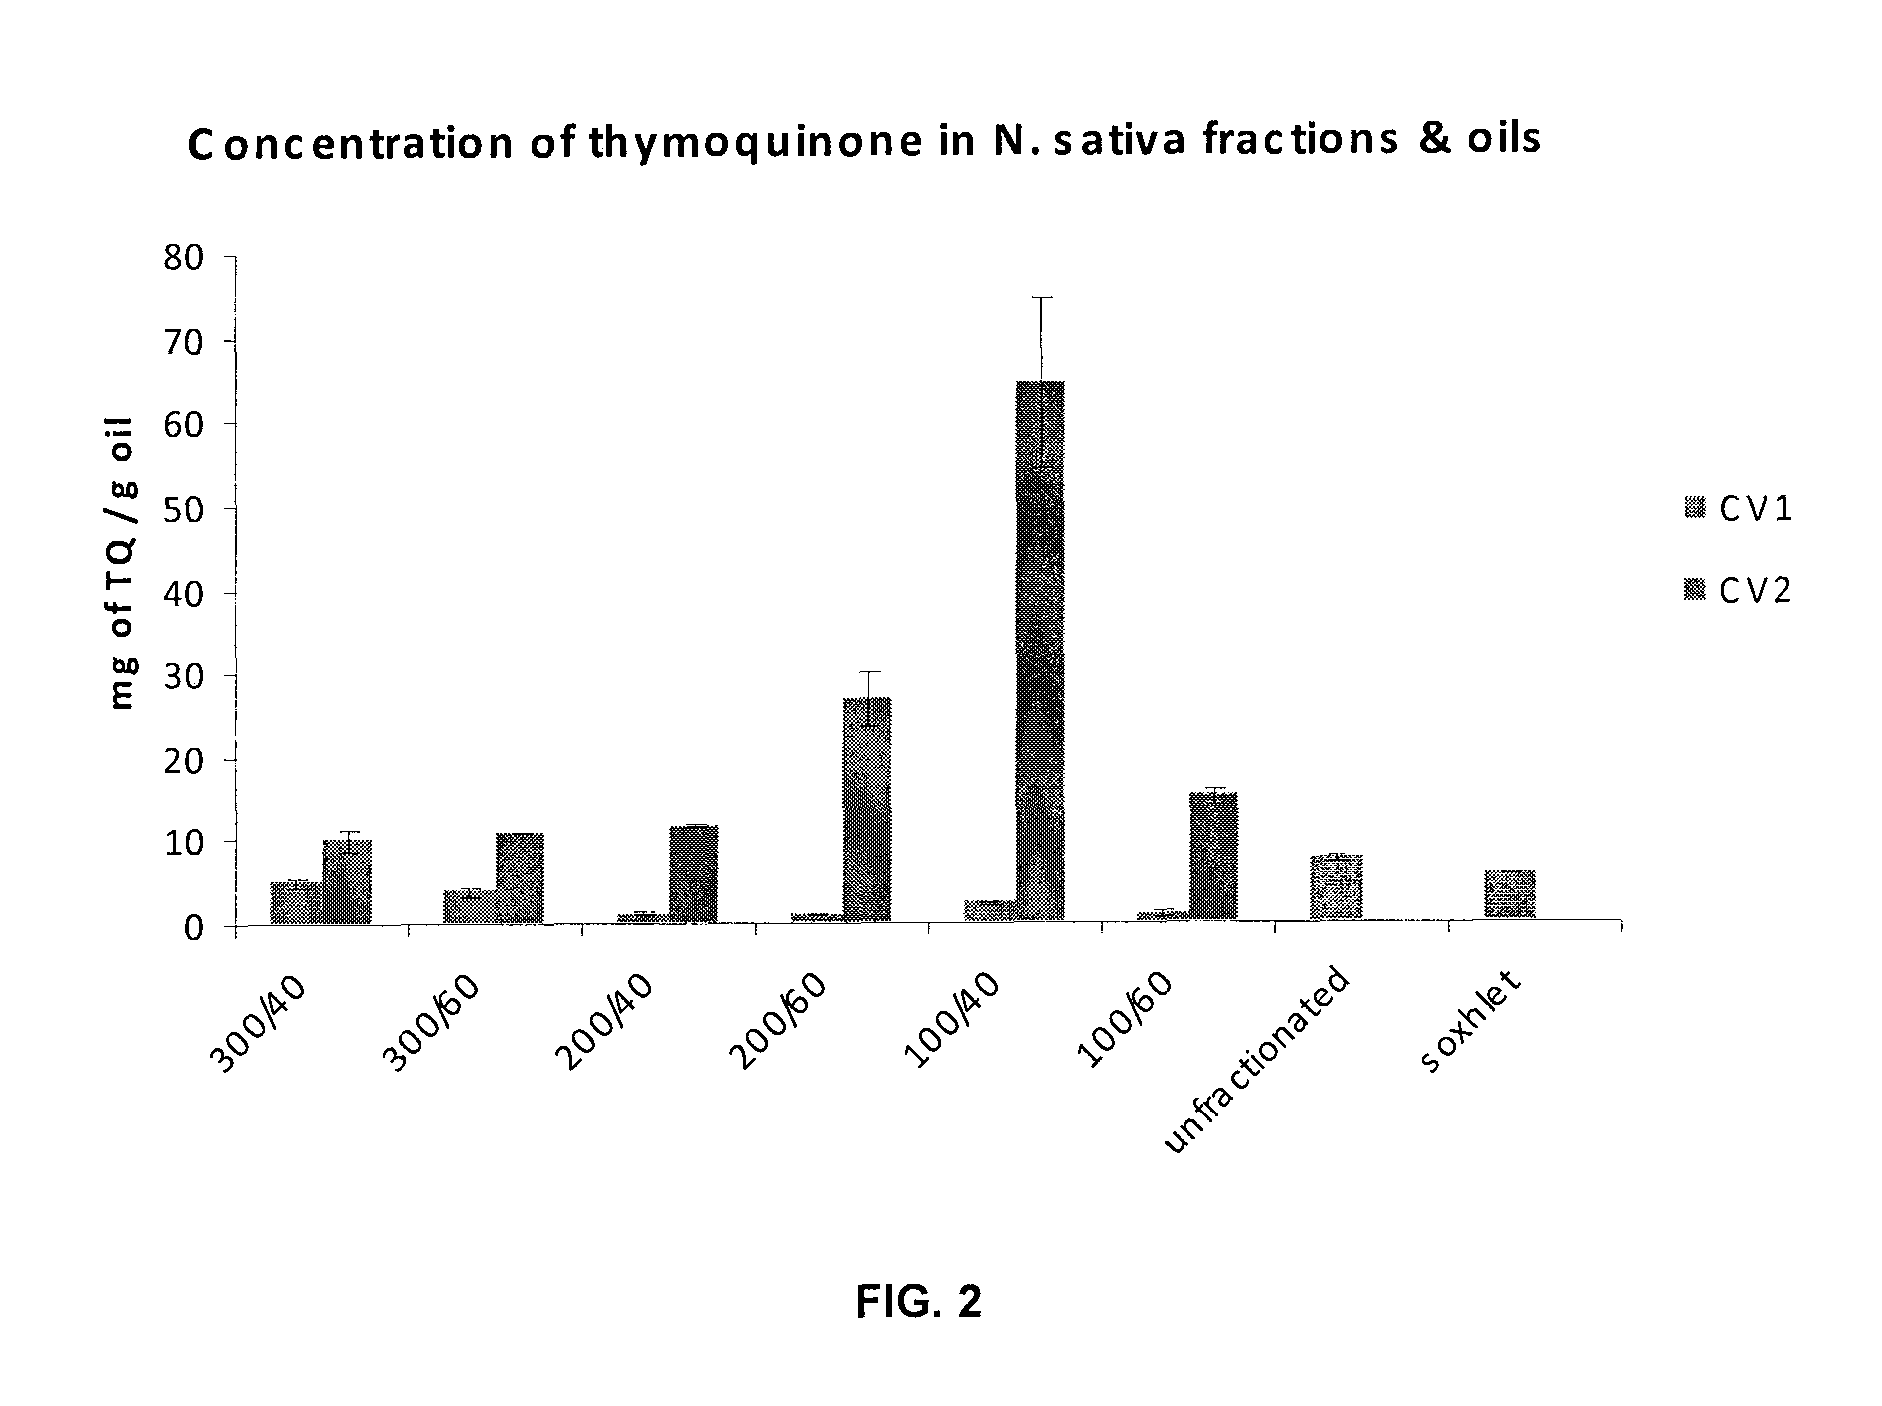 Extractions of fixed oil and thymoquinone rich fractions (TQRF)